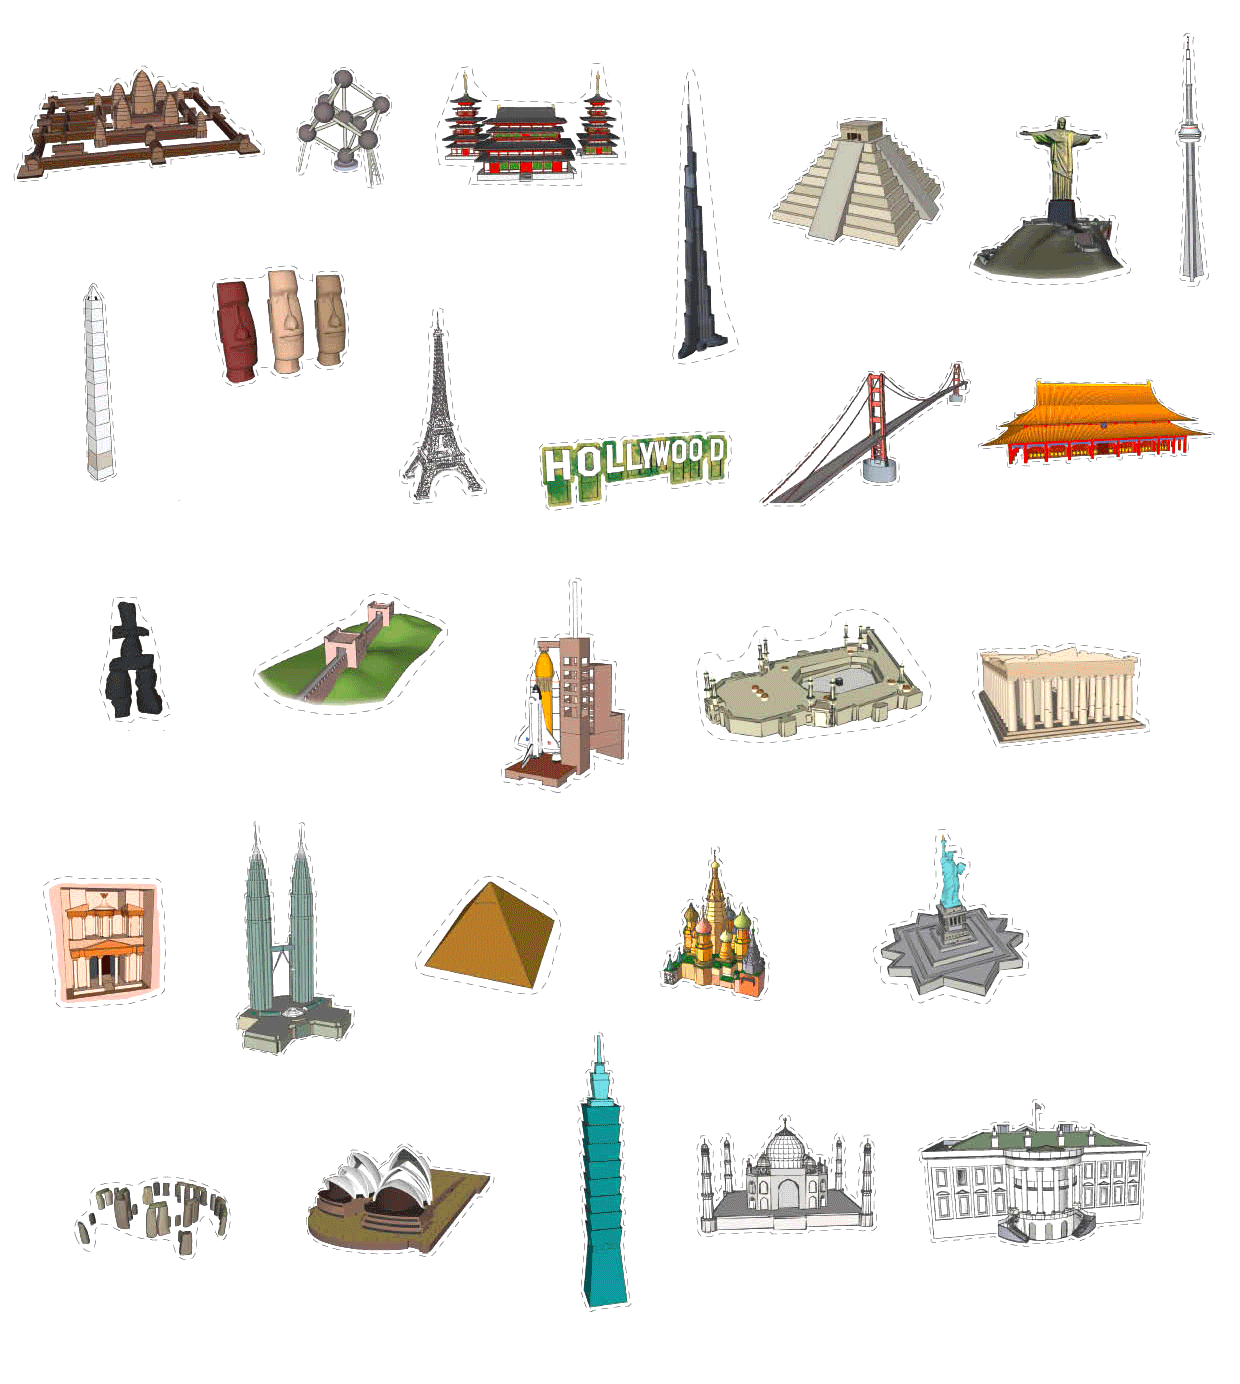 Can You Name These Landmarks Of The World?